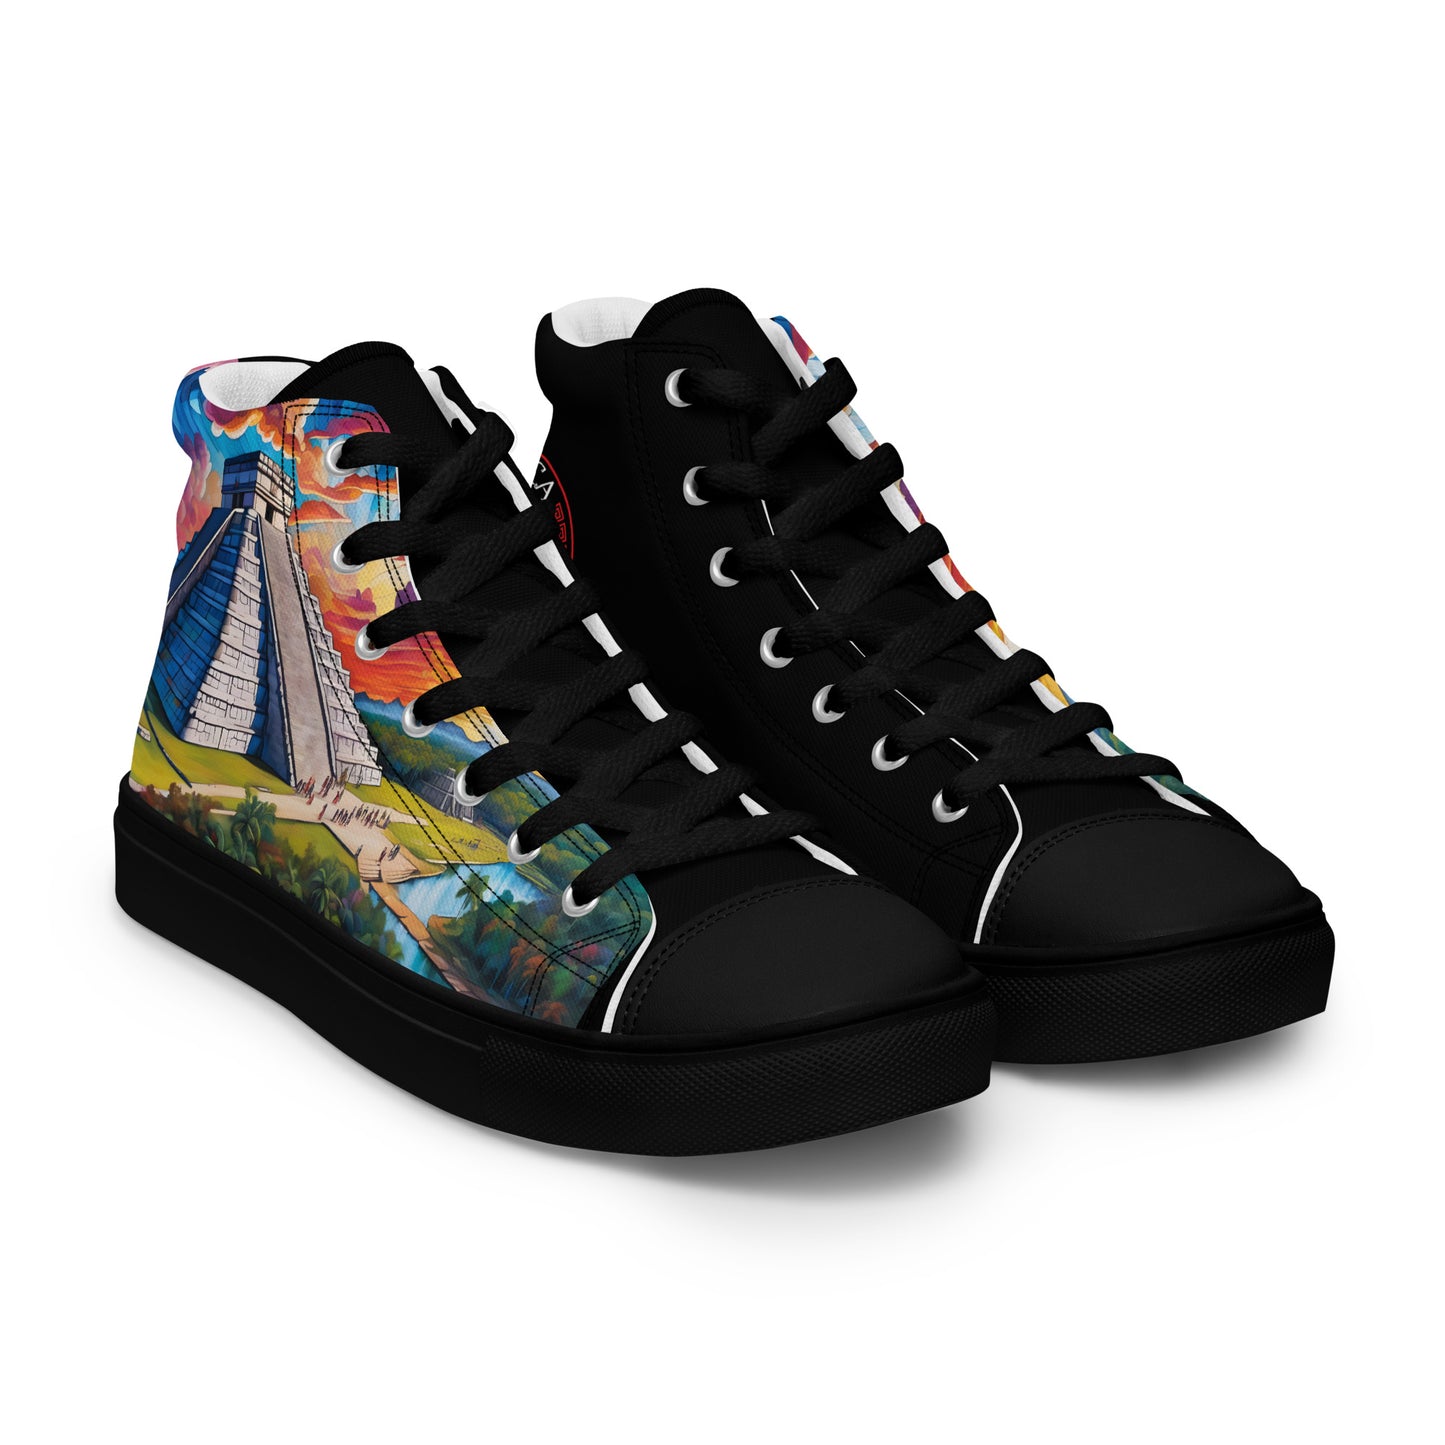 Chichén Itzá - Stained glass - Women - Black - High top shoes